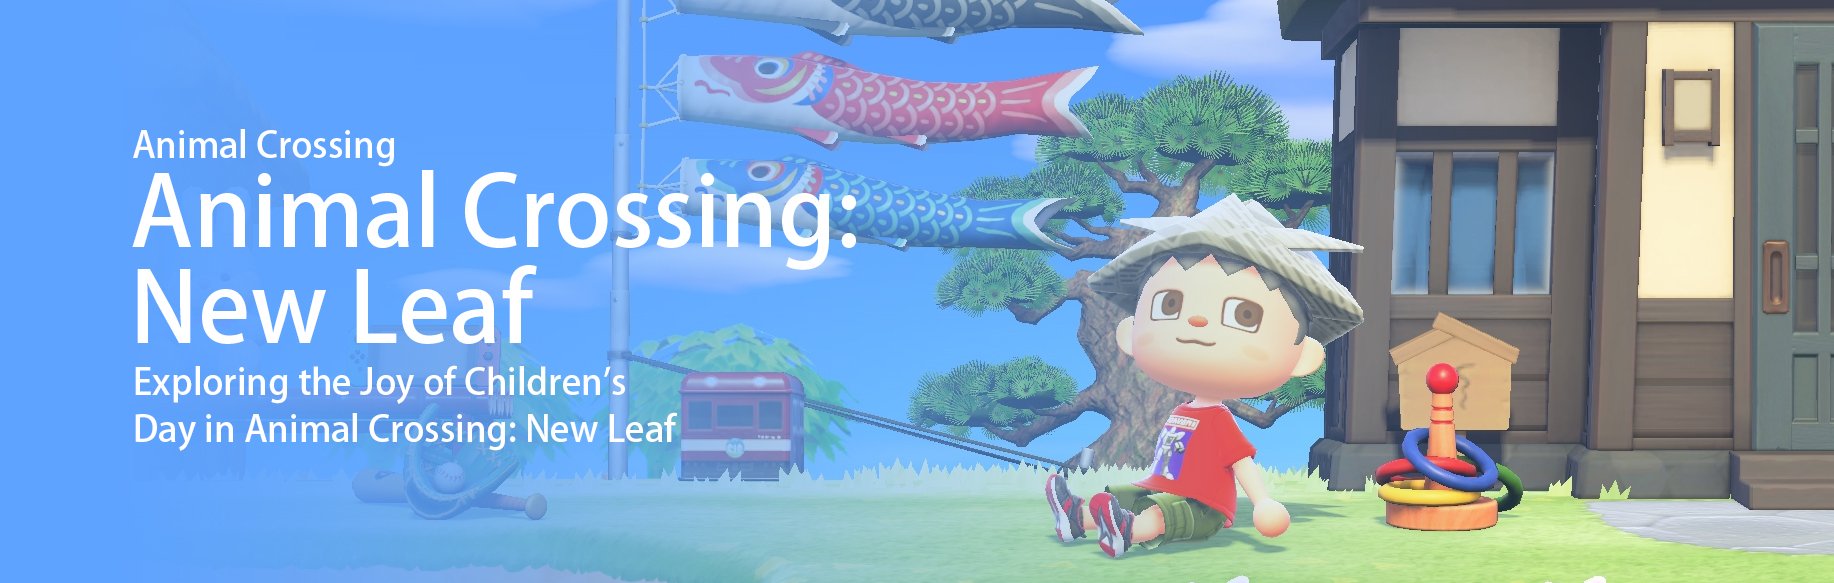 Exploring the Joy of Children's Day in Animal Crossing: New Leaf